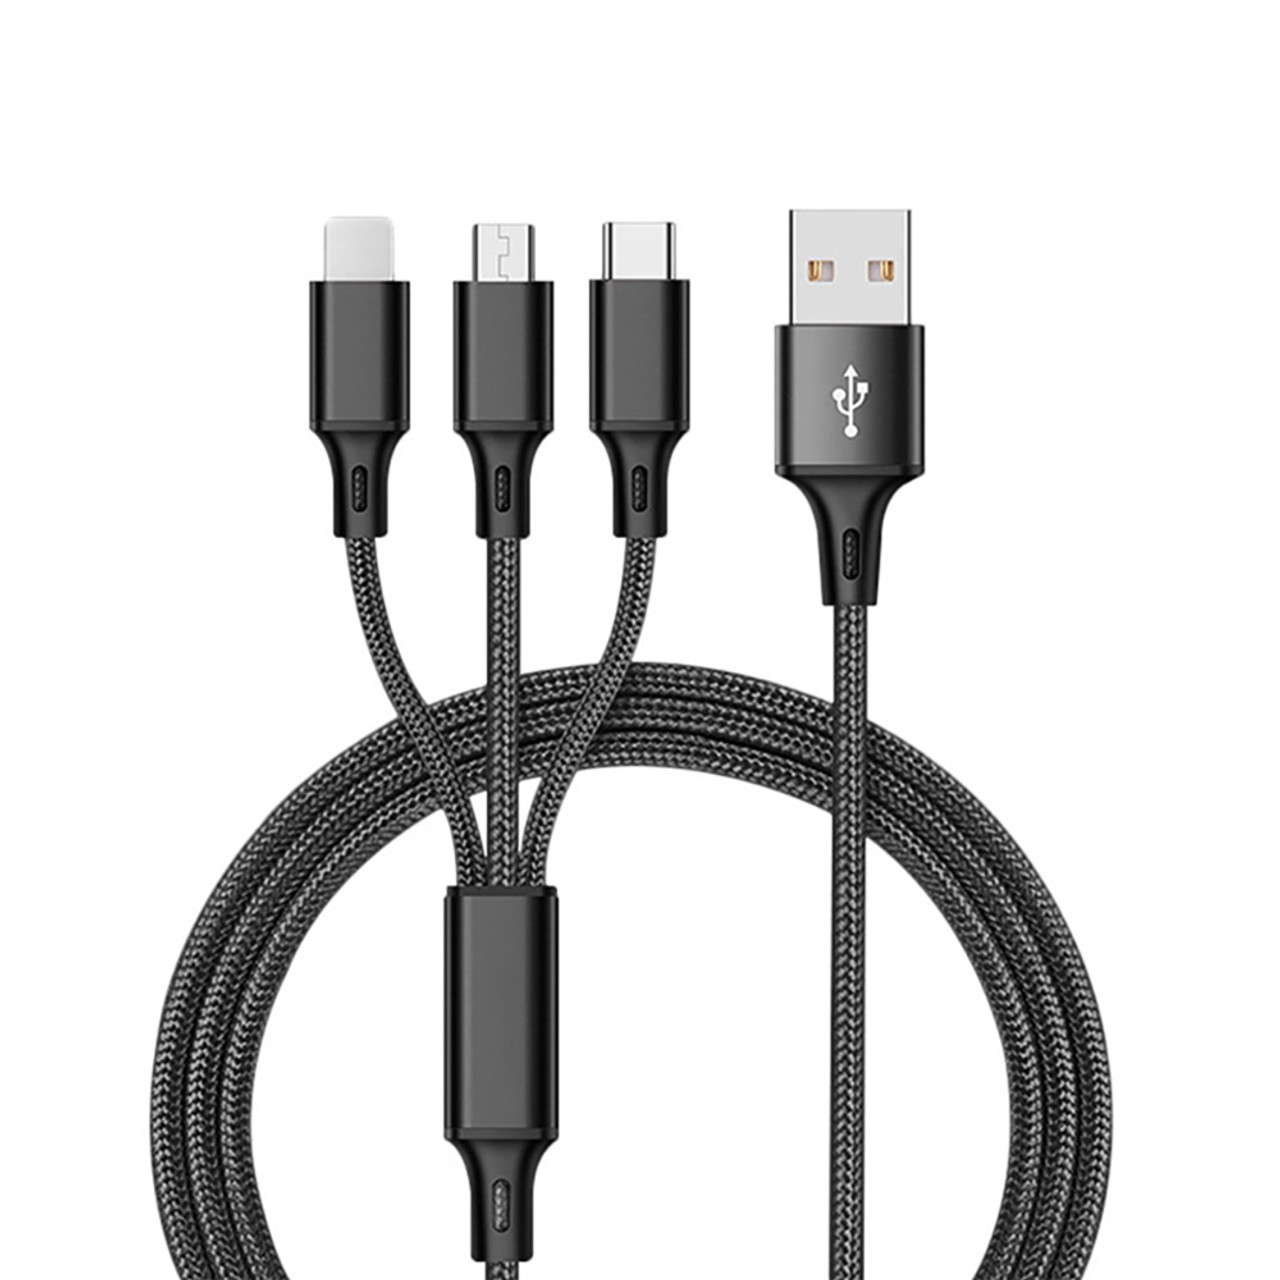 3-in-1 Nylon Braided 4-Foot Charging Cable for iPhone $7.99 (80% OFF)